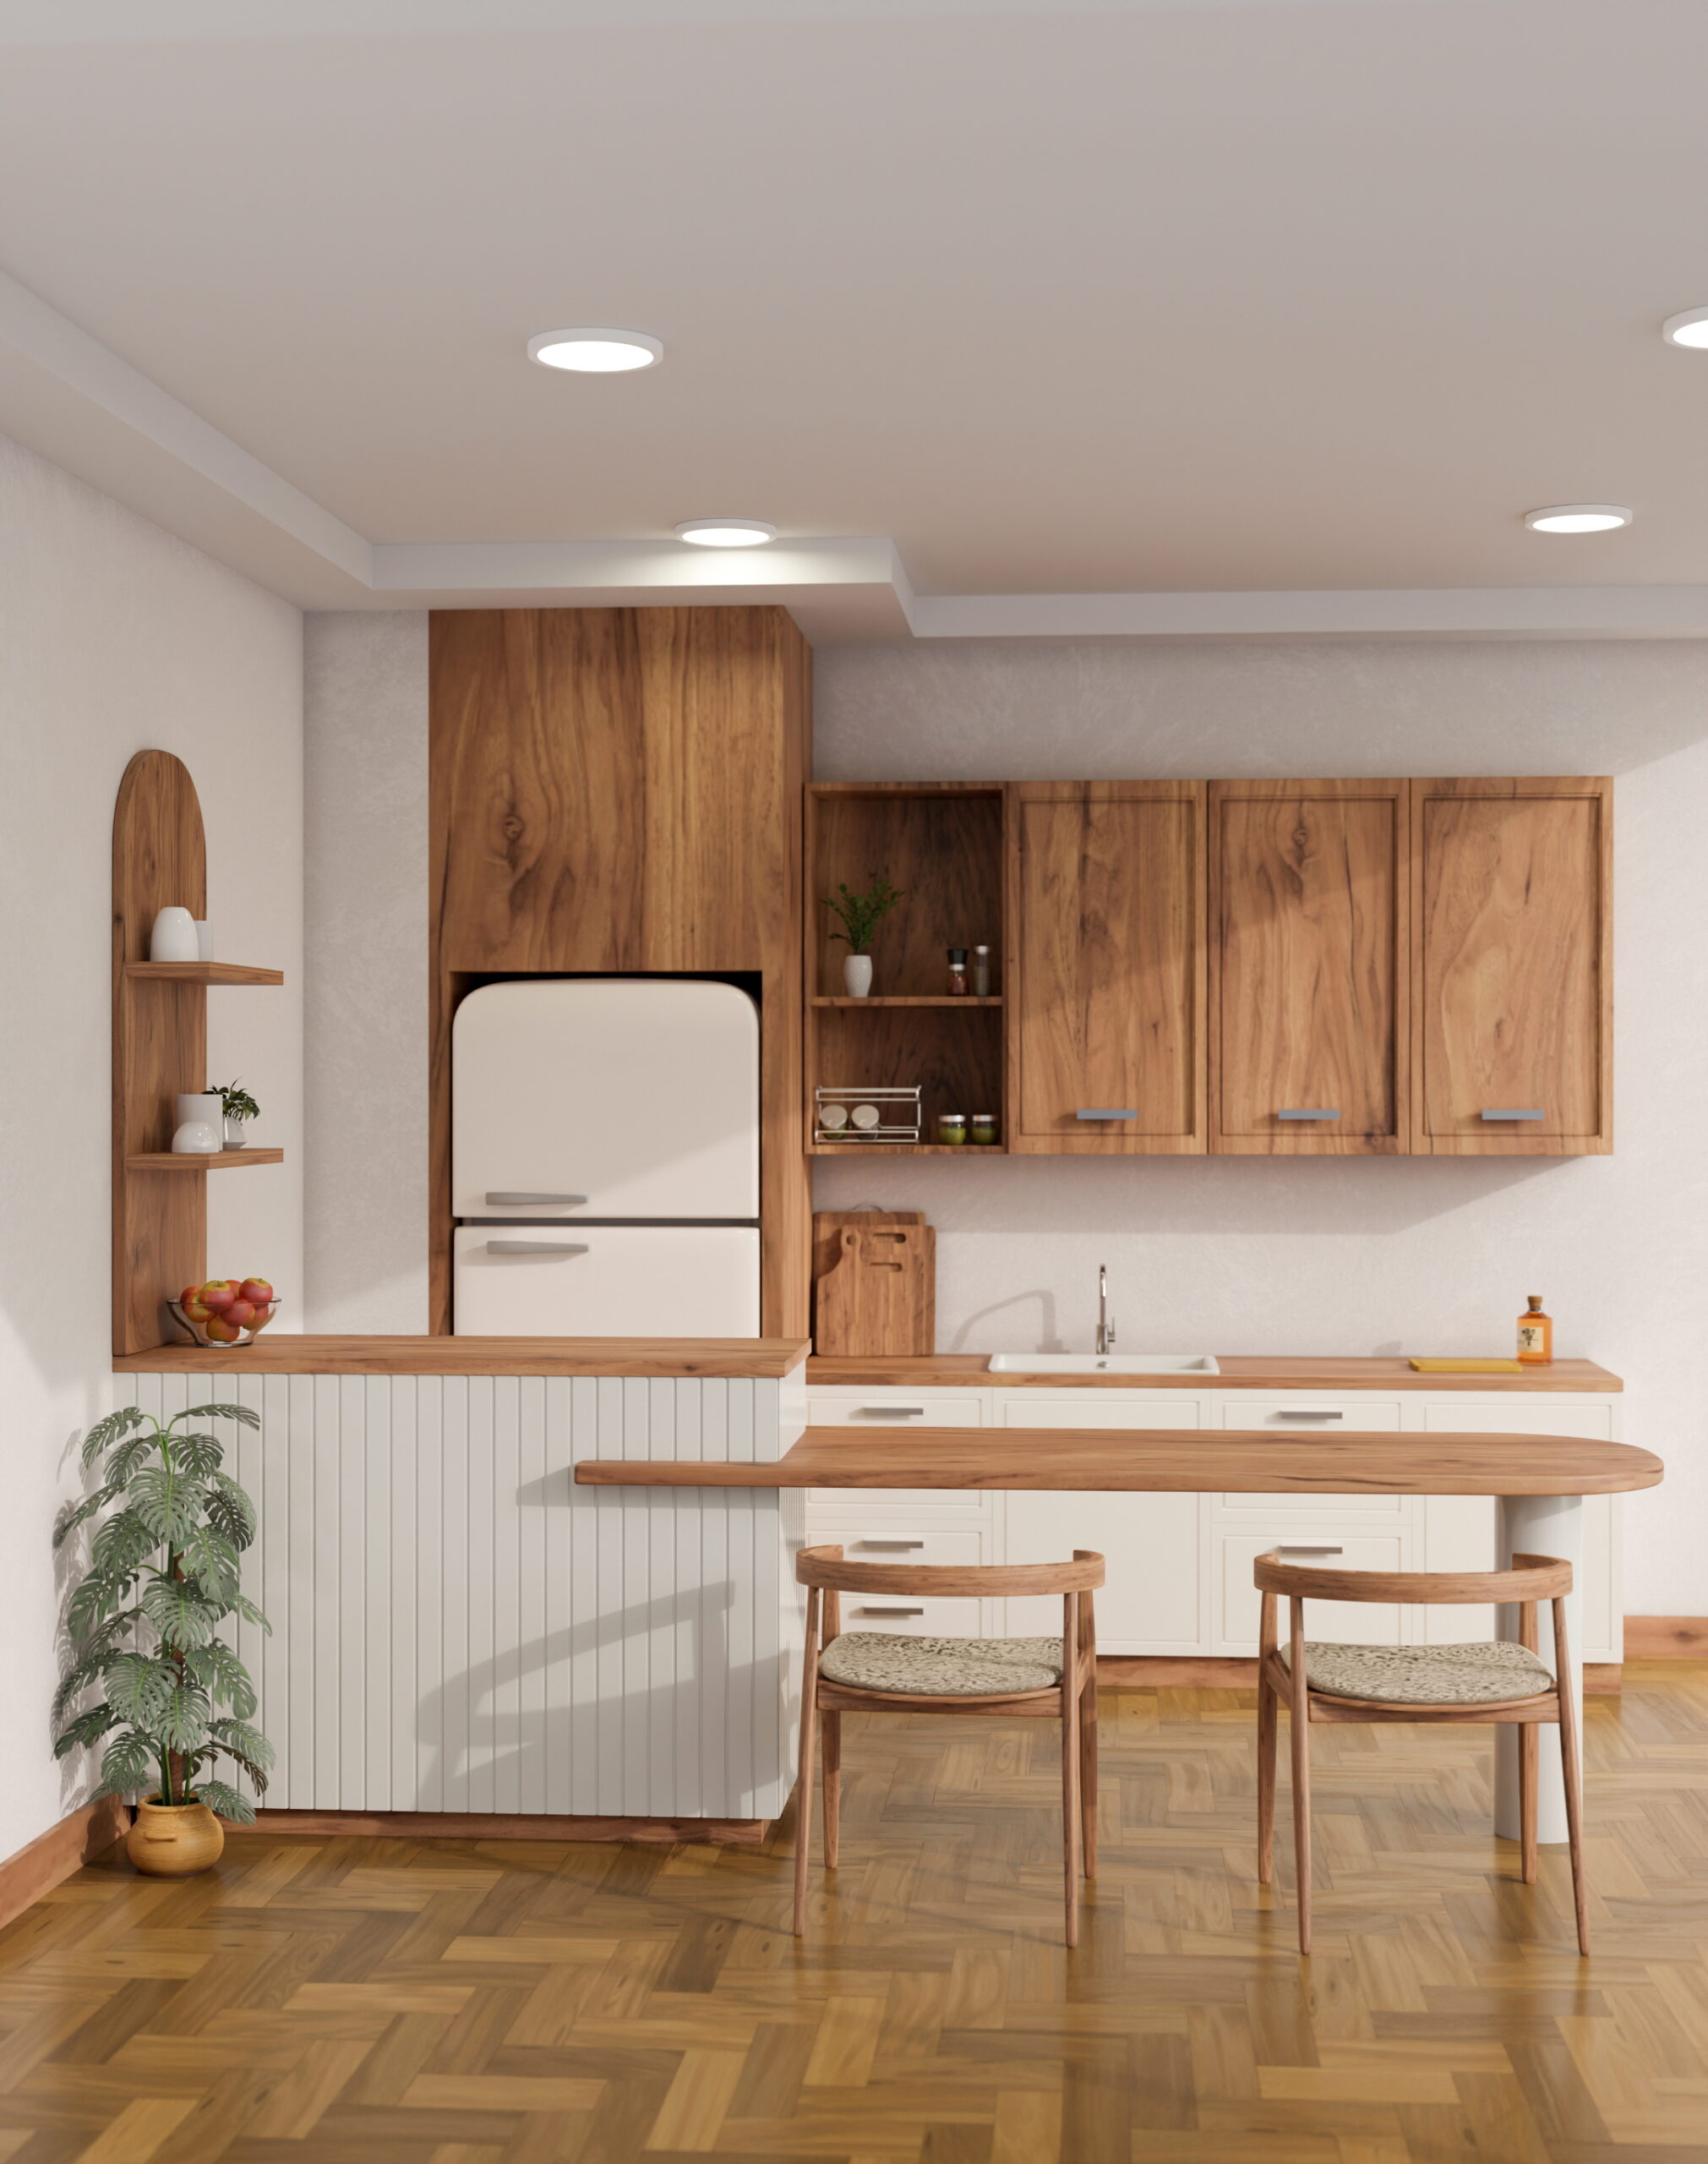 Utilize built-in seating in small kitchens for dining and multipurpose use.